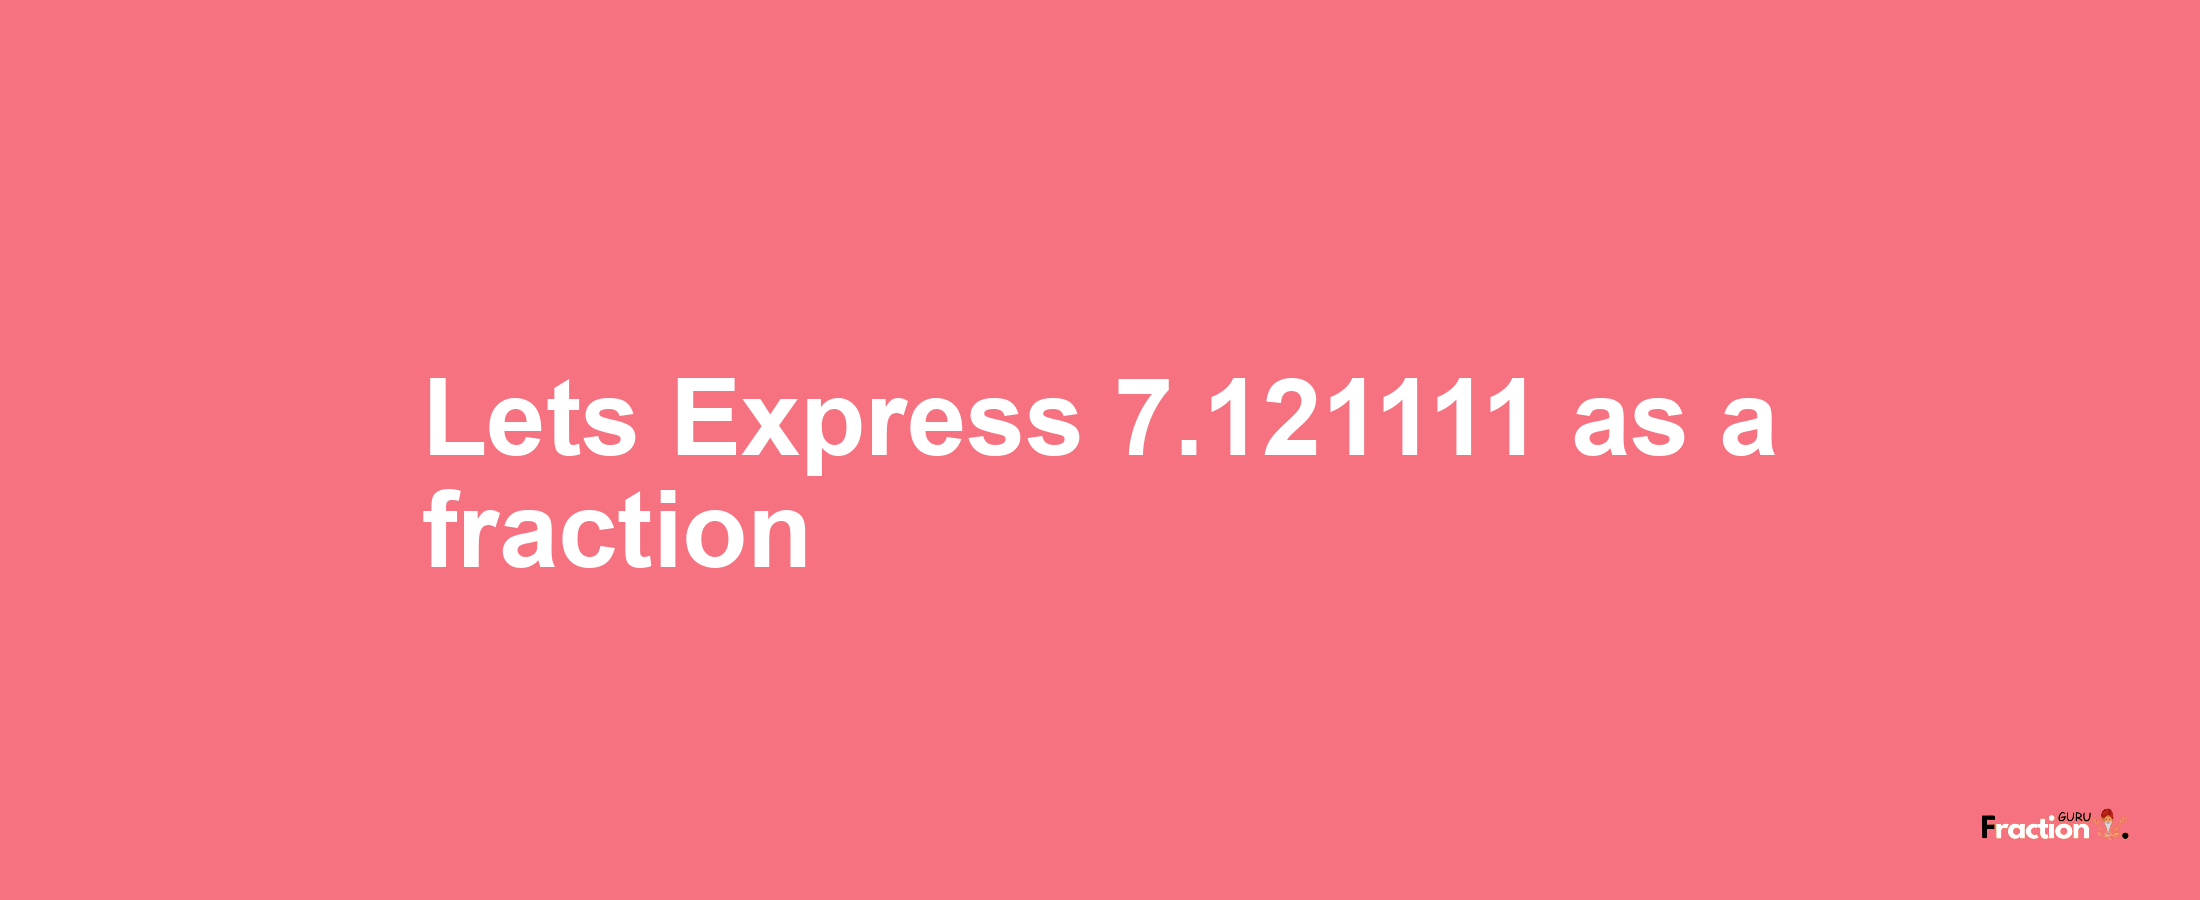 Lets Express 7.121111 as afraction